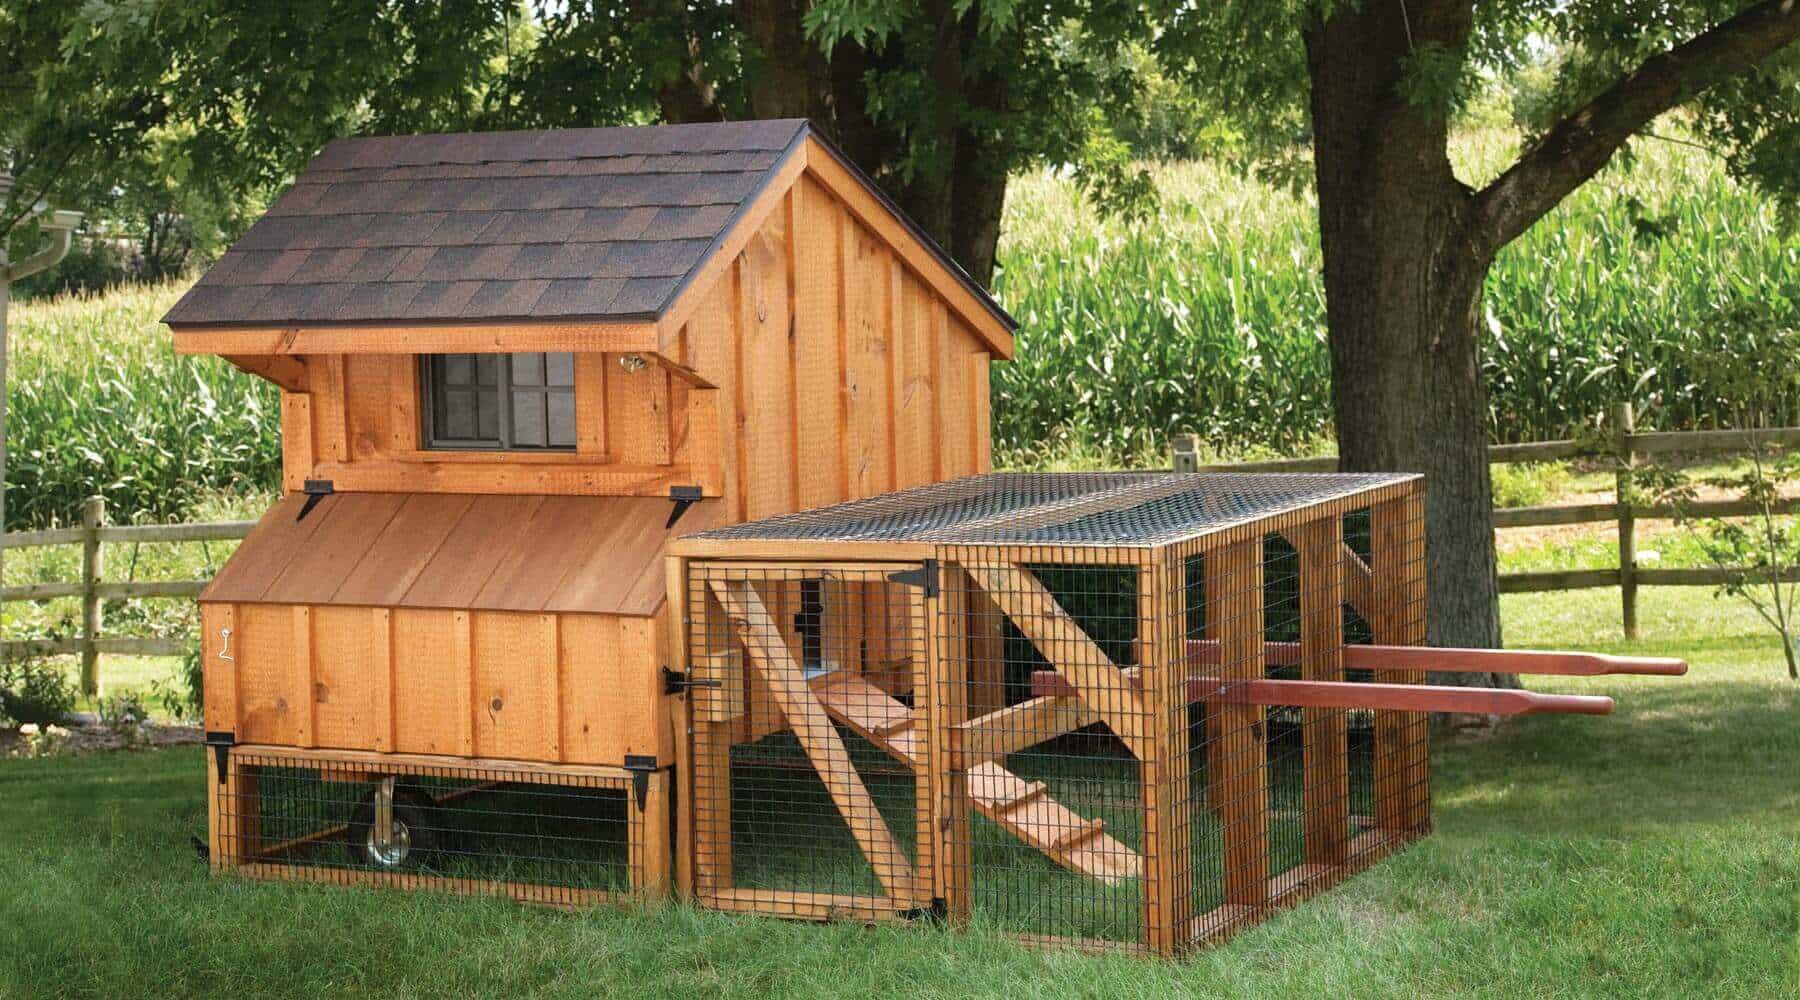 Best Chicken Coops and Nesting Boxes Designs Ideas - Chicken Coops 9